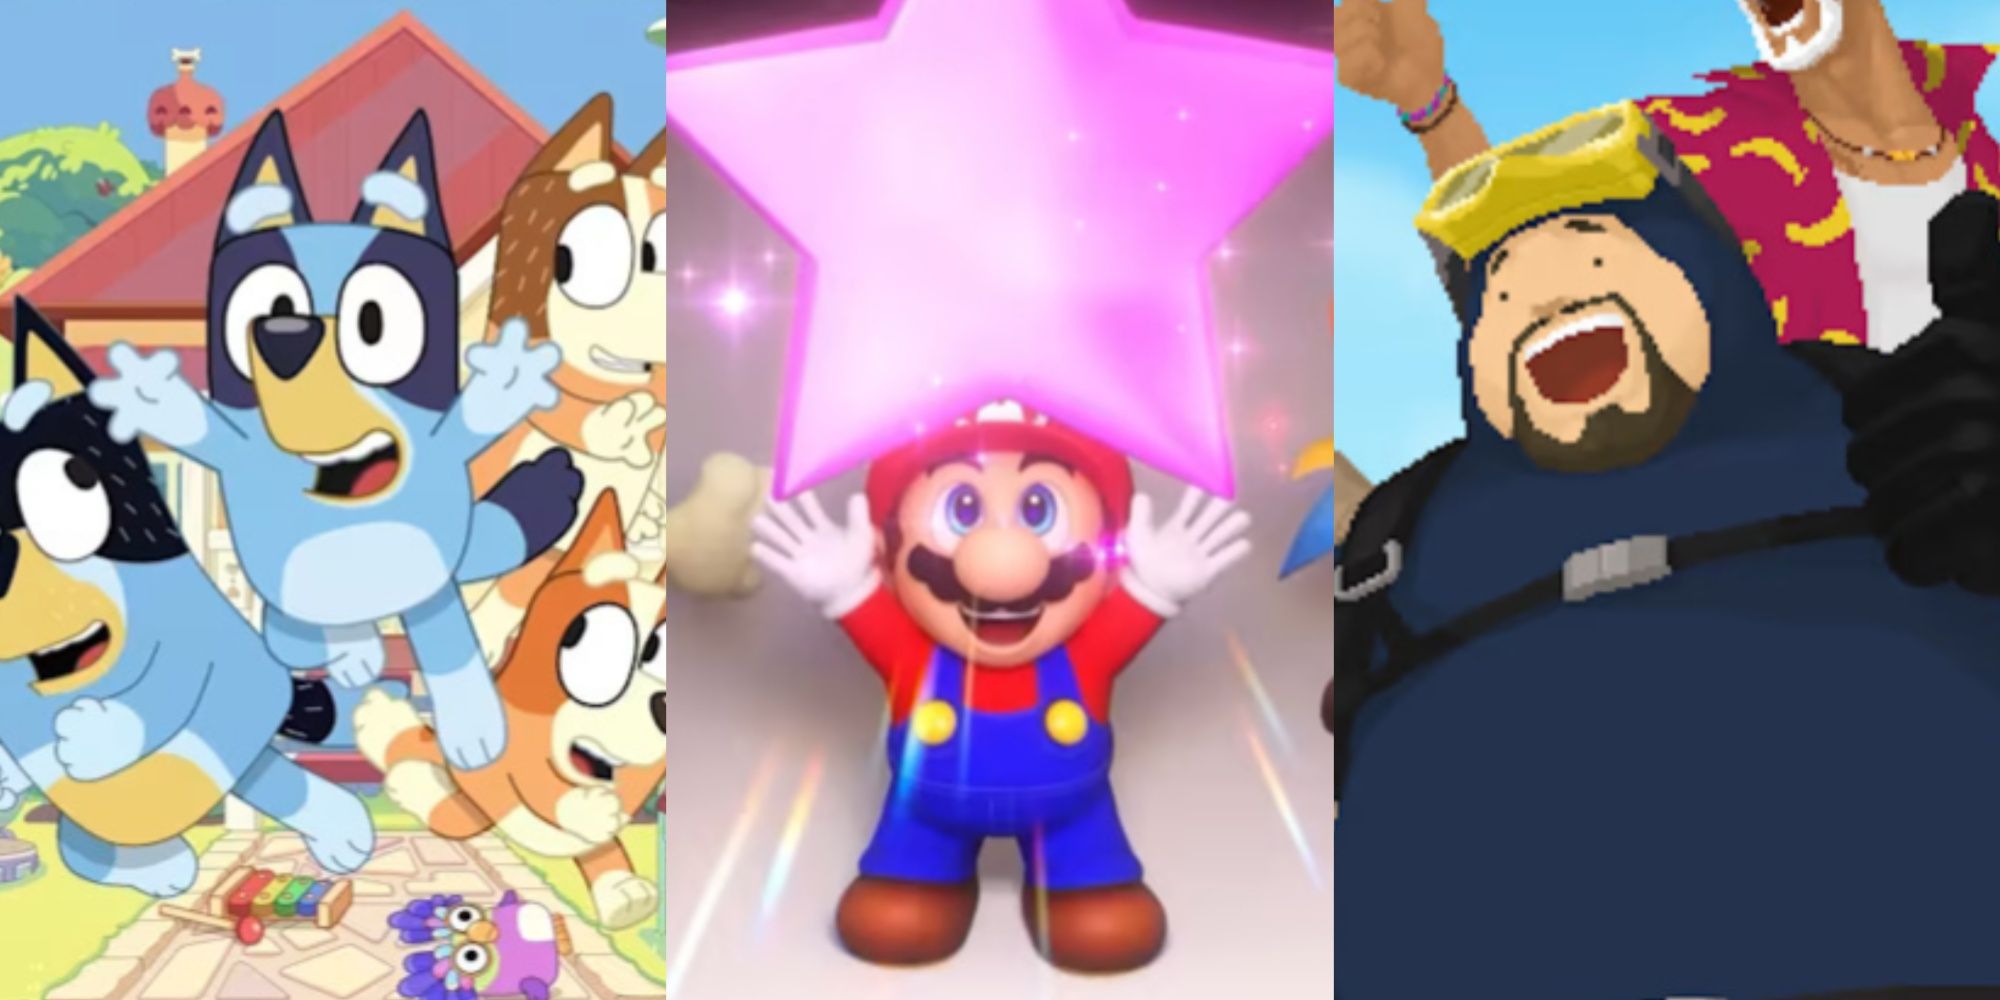 bluey with her family, mario holding up a pink star, and dave the diver